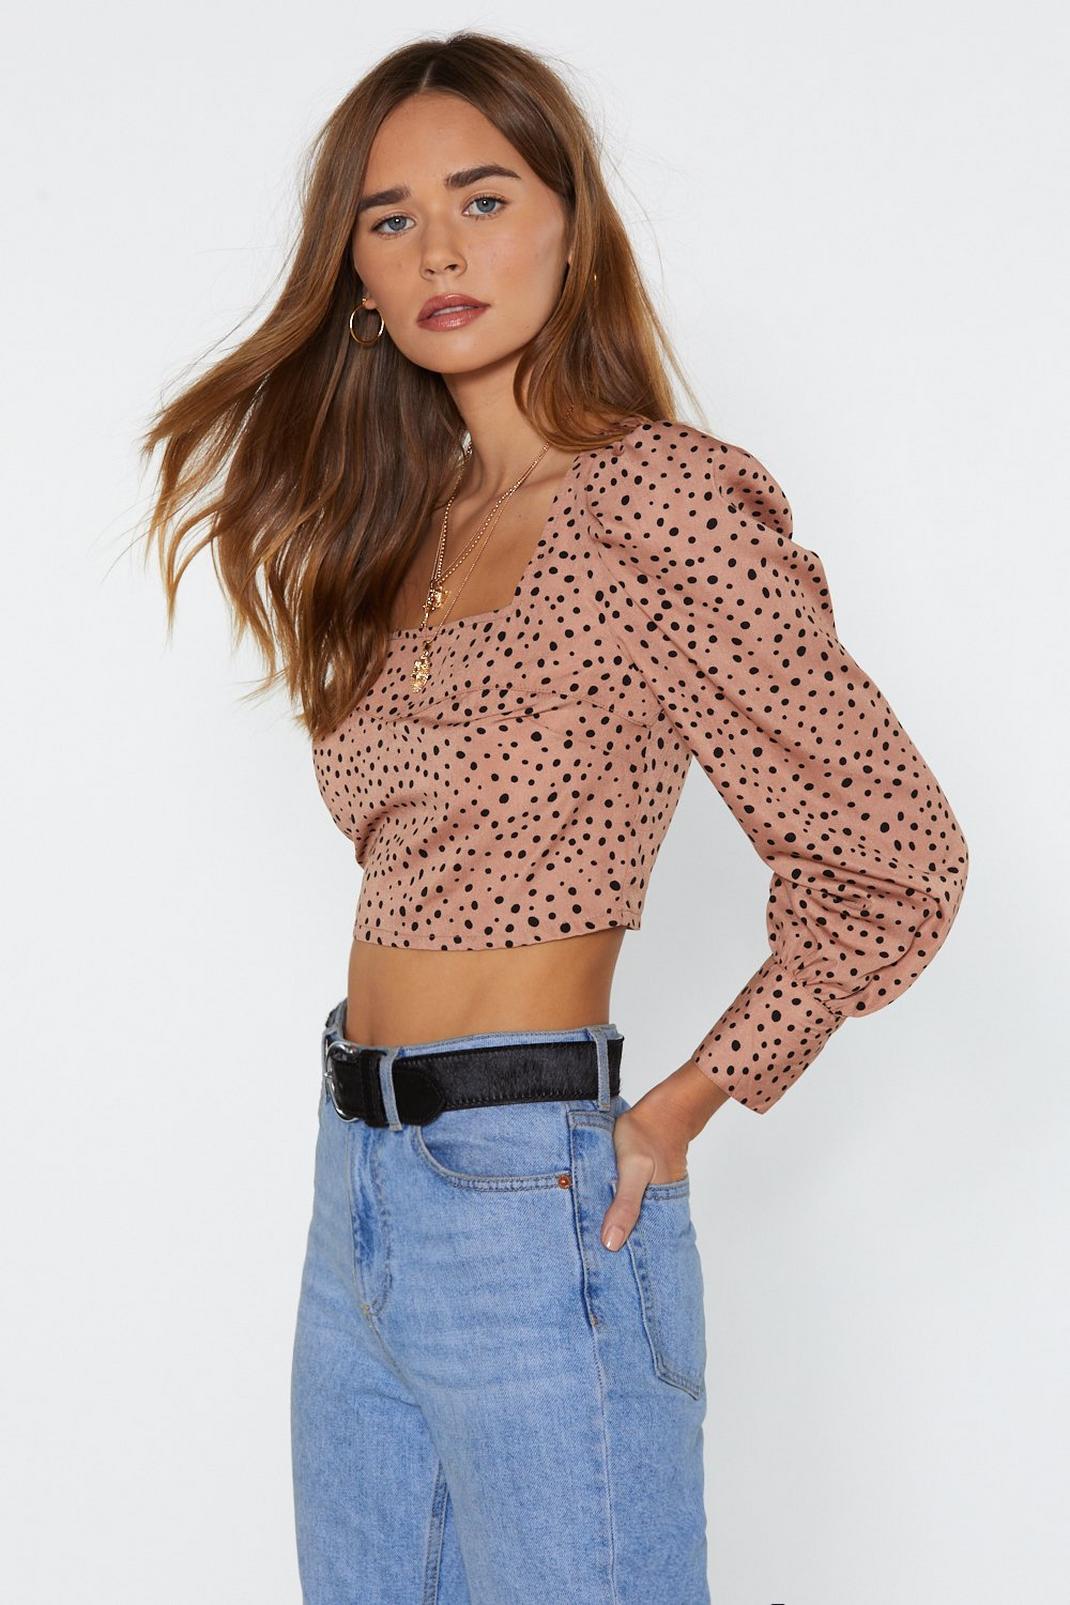 Go in Spot Cropped Square Neck Blouse | Nasty Gal